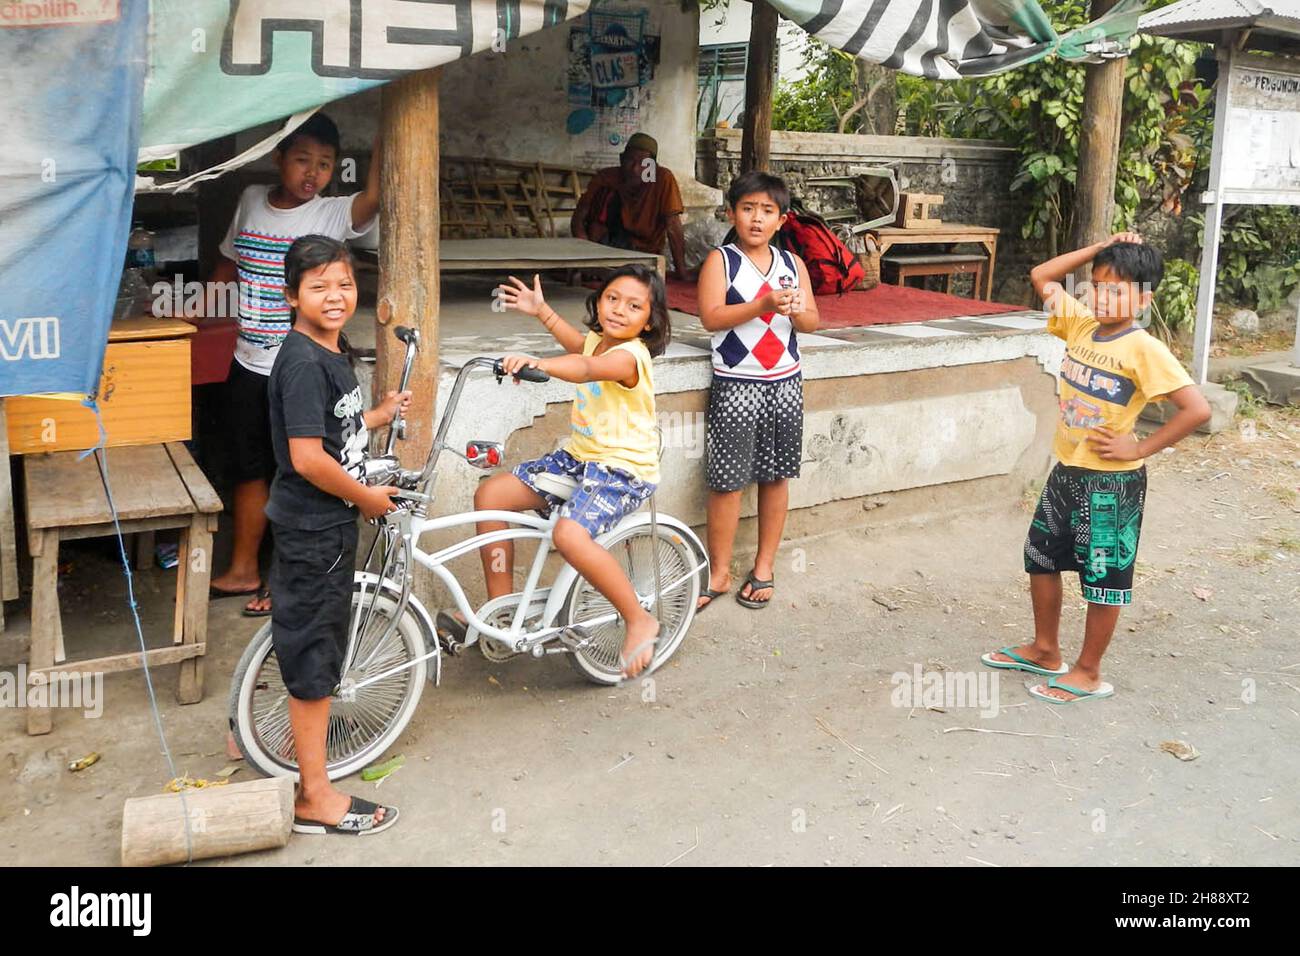 Young Asian kids playing together, one girl is sitting on a bike. Group of Indonesian children. Stock Photo